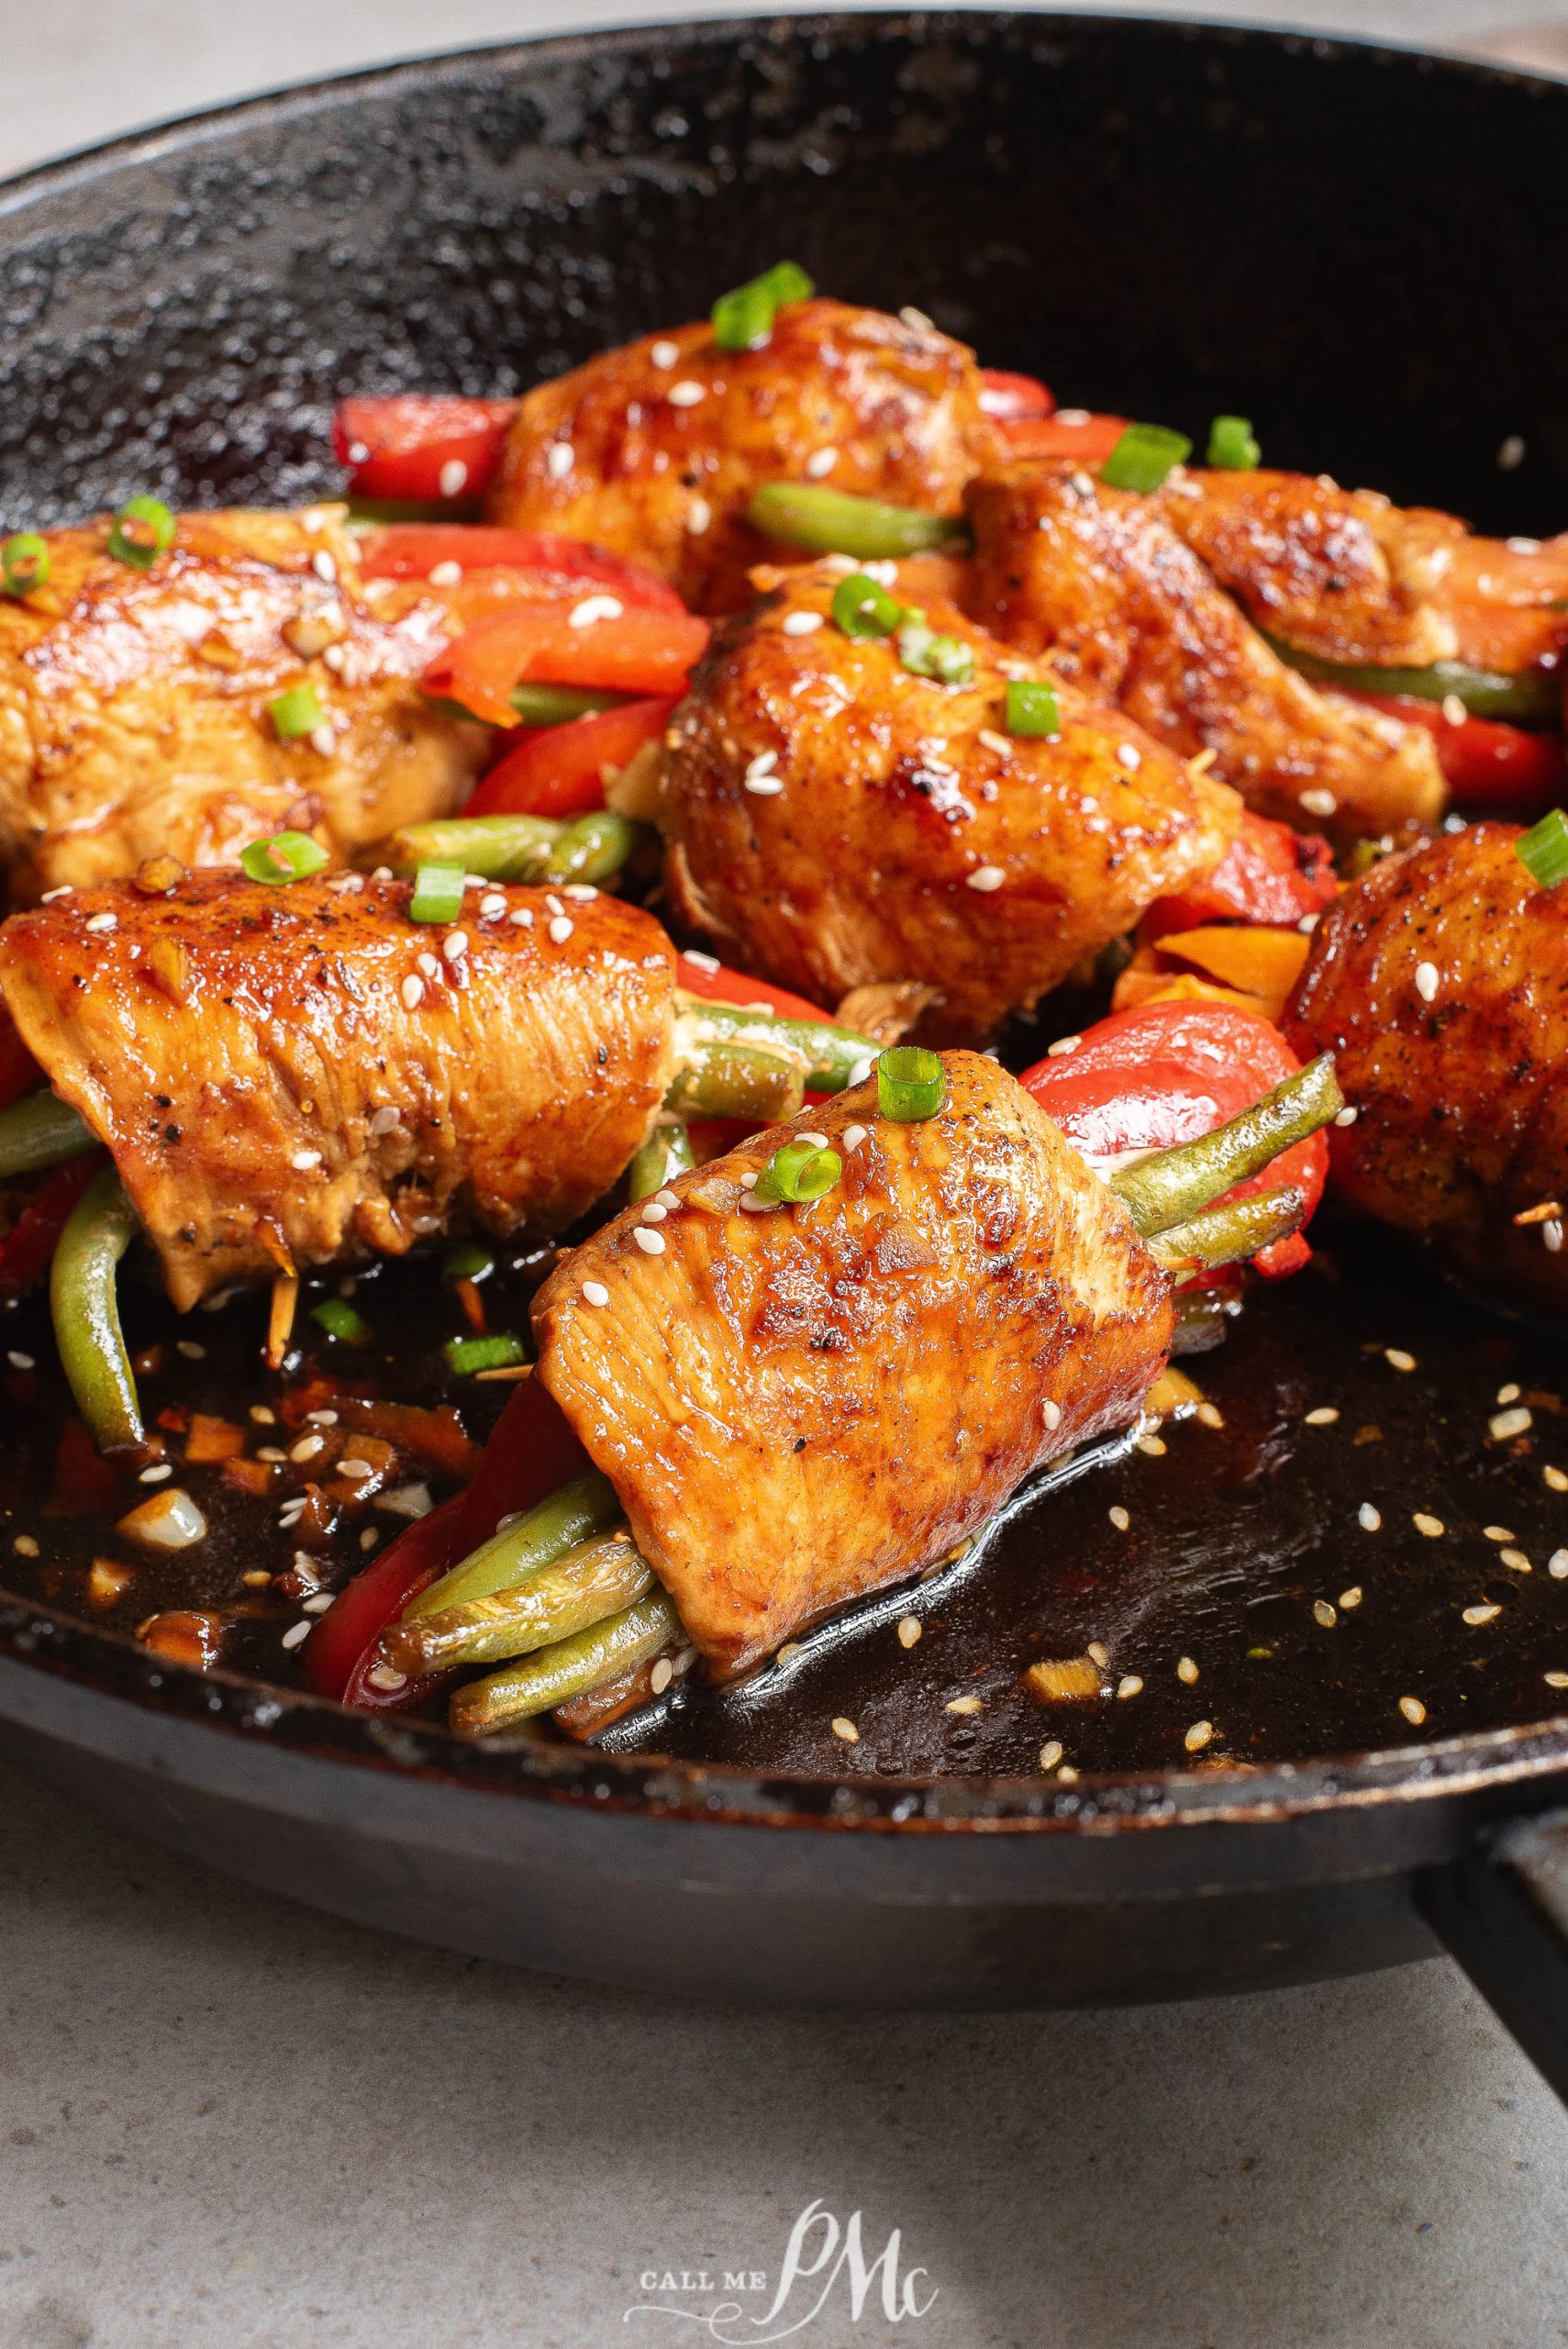 Chicken and peppers in a skillet.